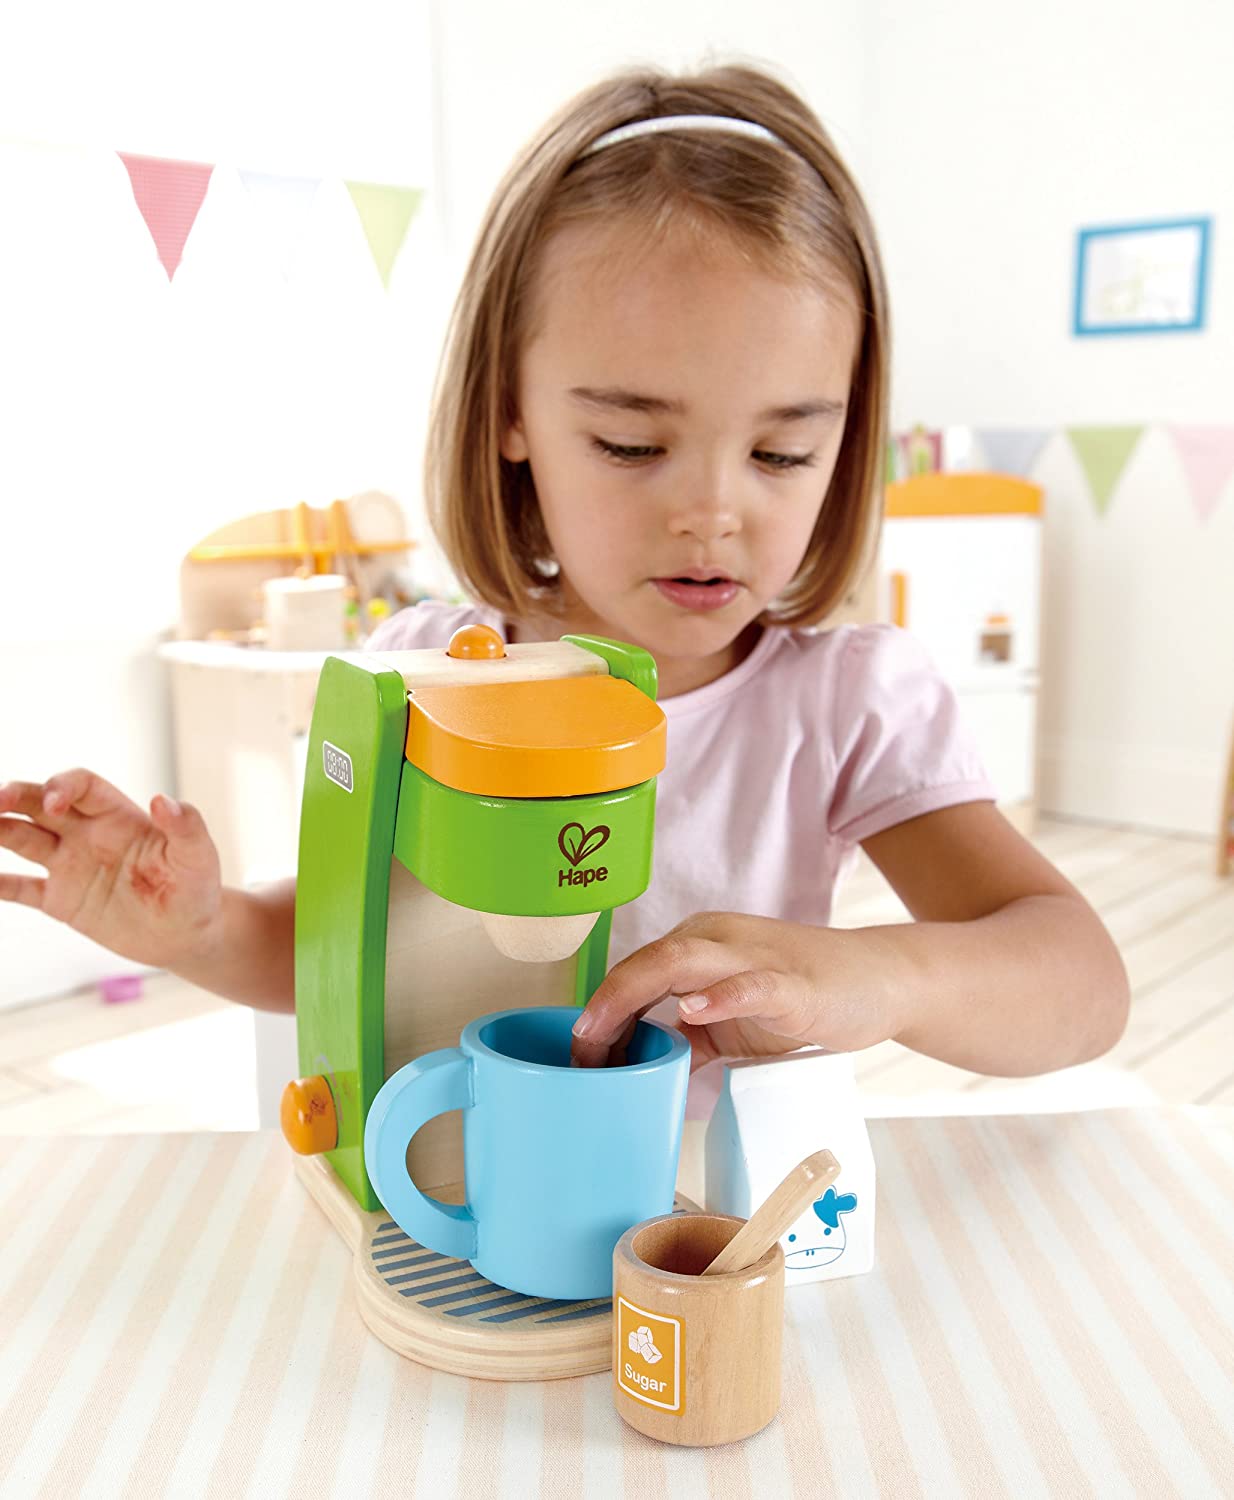 Hape Mighty Mixer Wooden Play Kitchen Set with Accessories